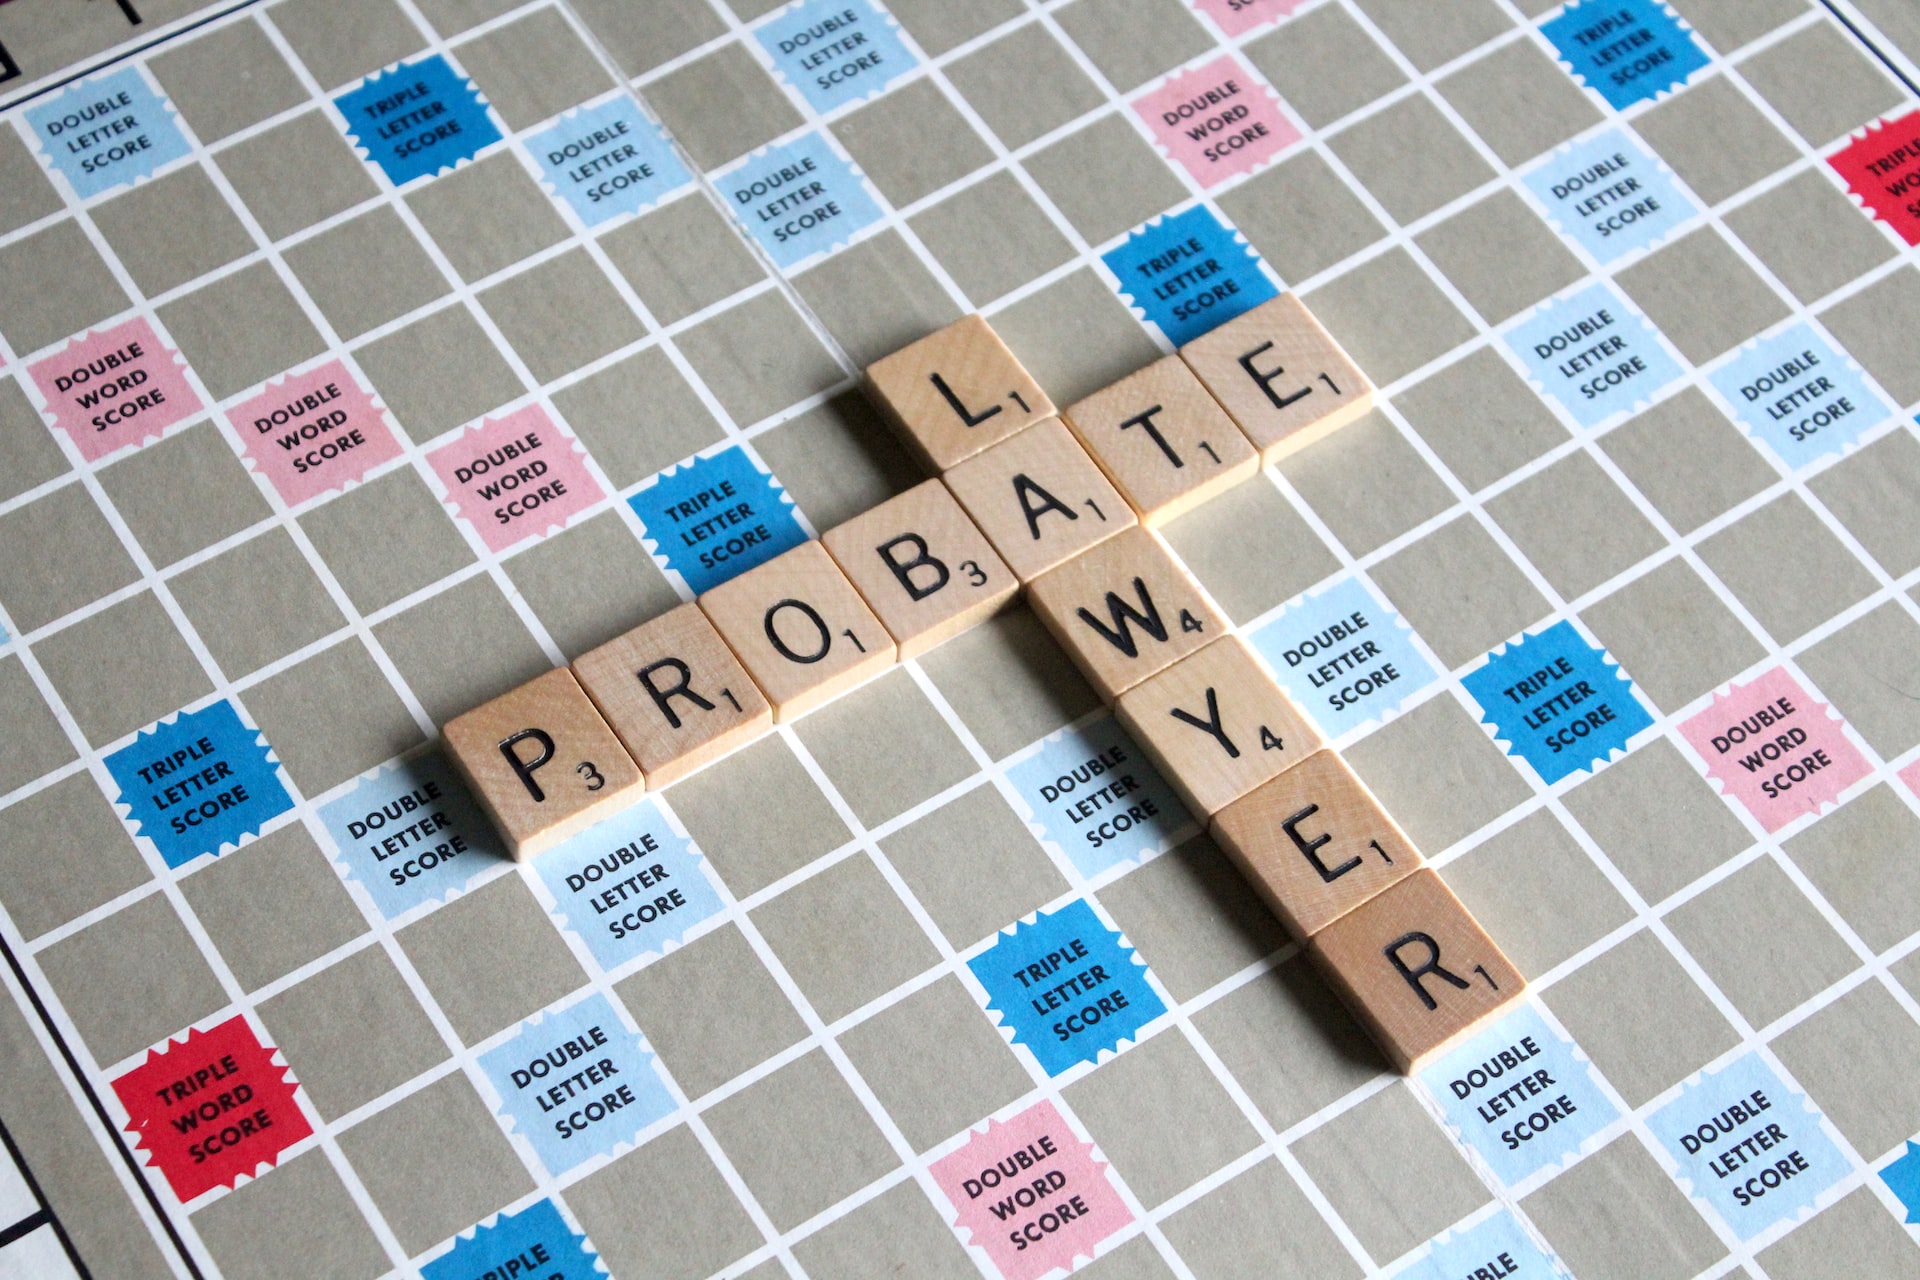 how probate works - scrabble tiles say probate lawyer